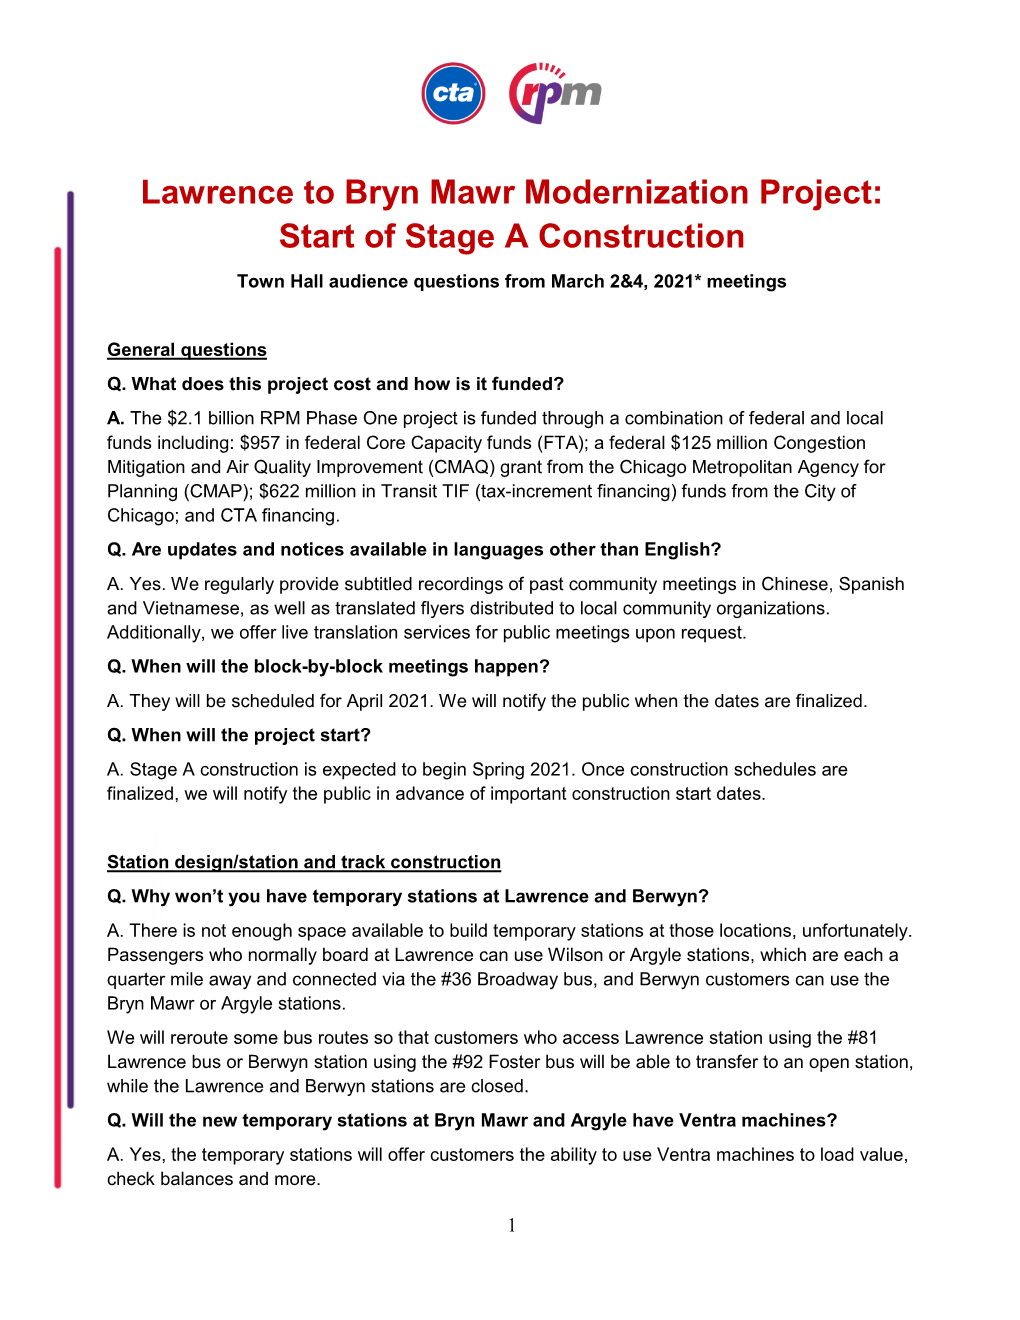 Lawrence to Bryn Mawr Modernization Project: Start of Stage a Construction